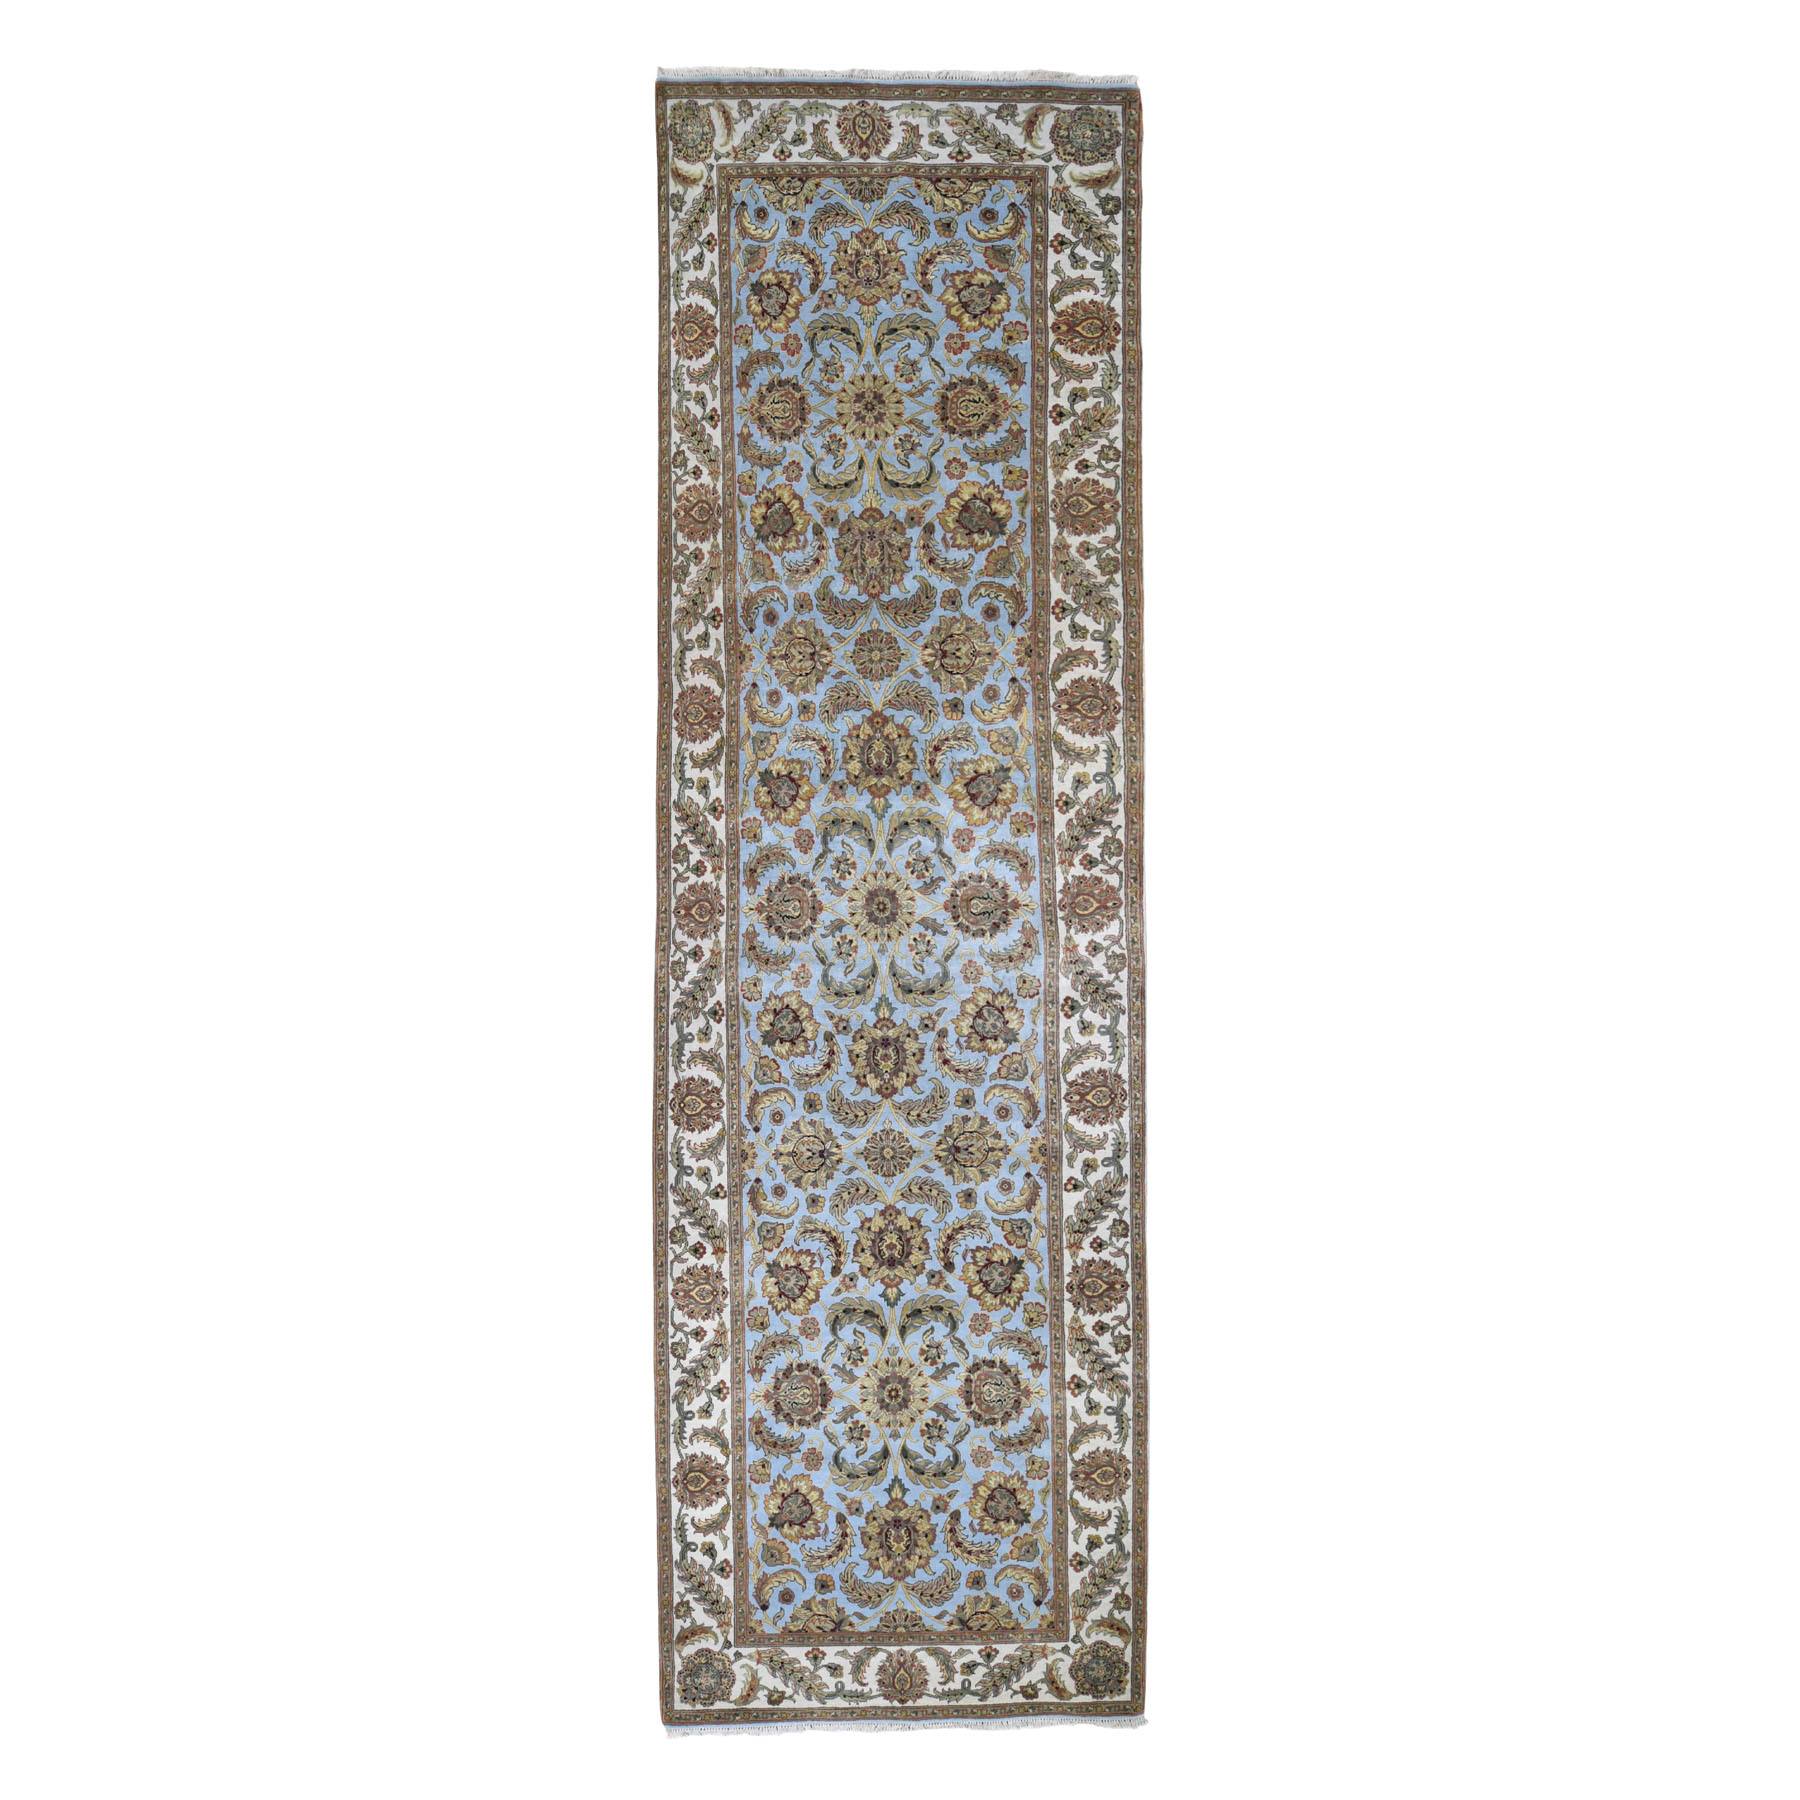 Rajasthan-Hand-Knotted-Rug-244685